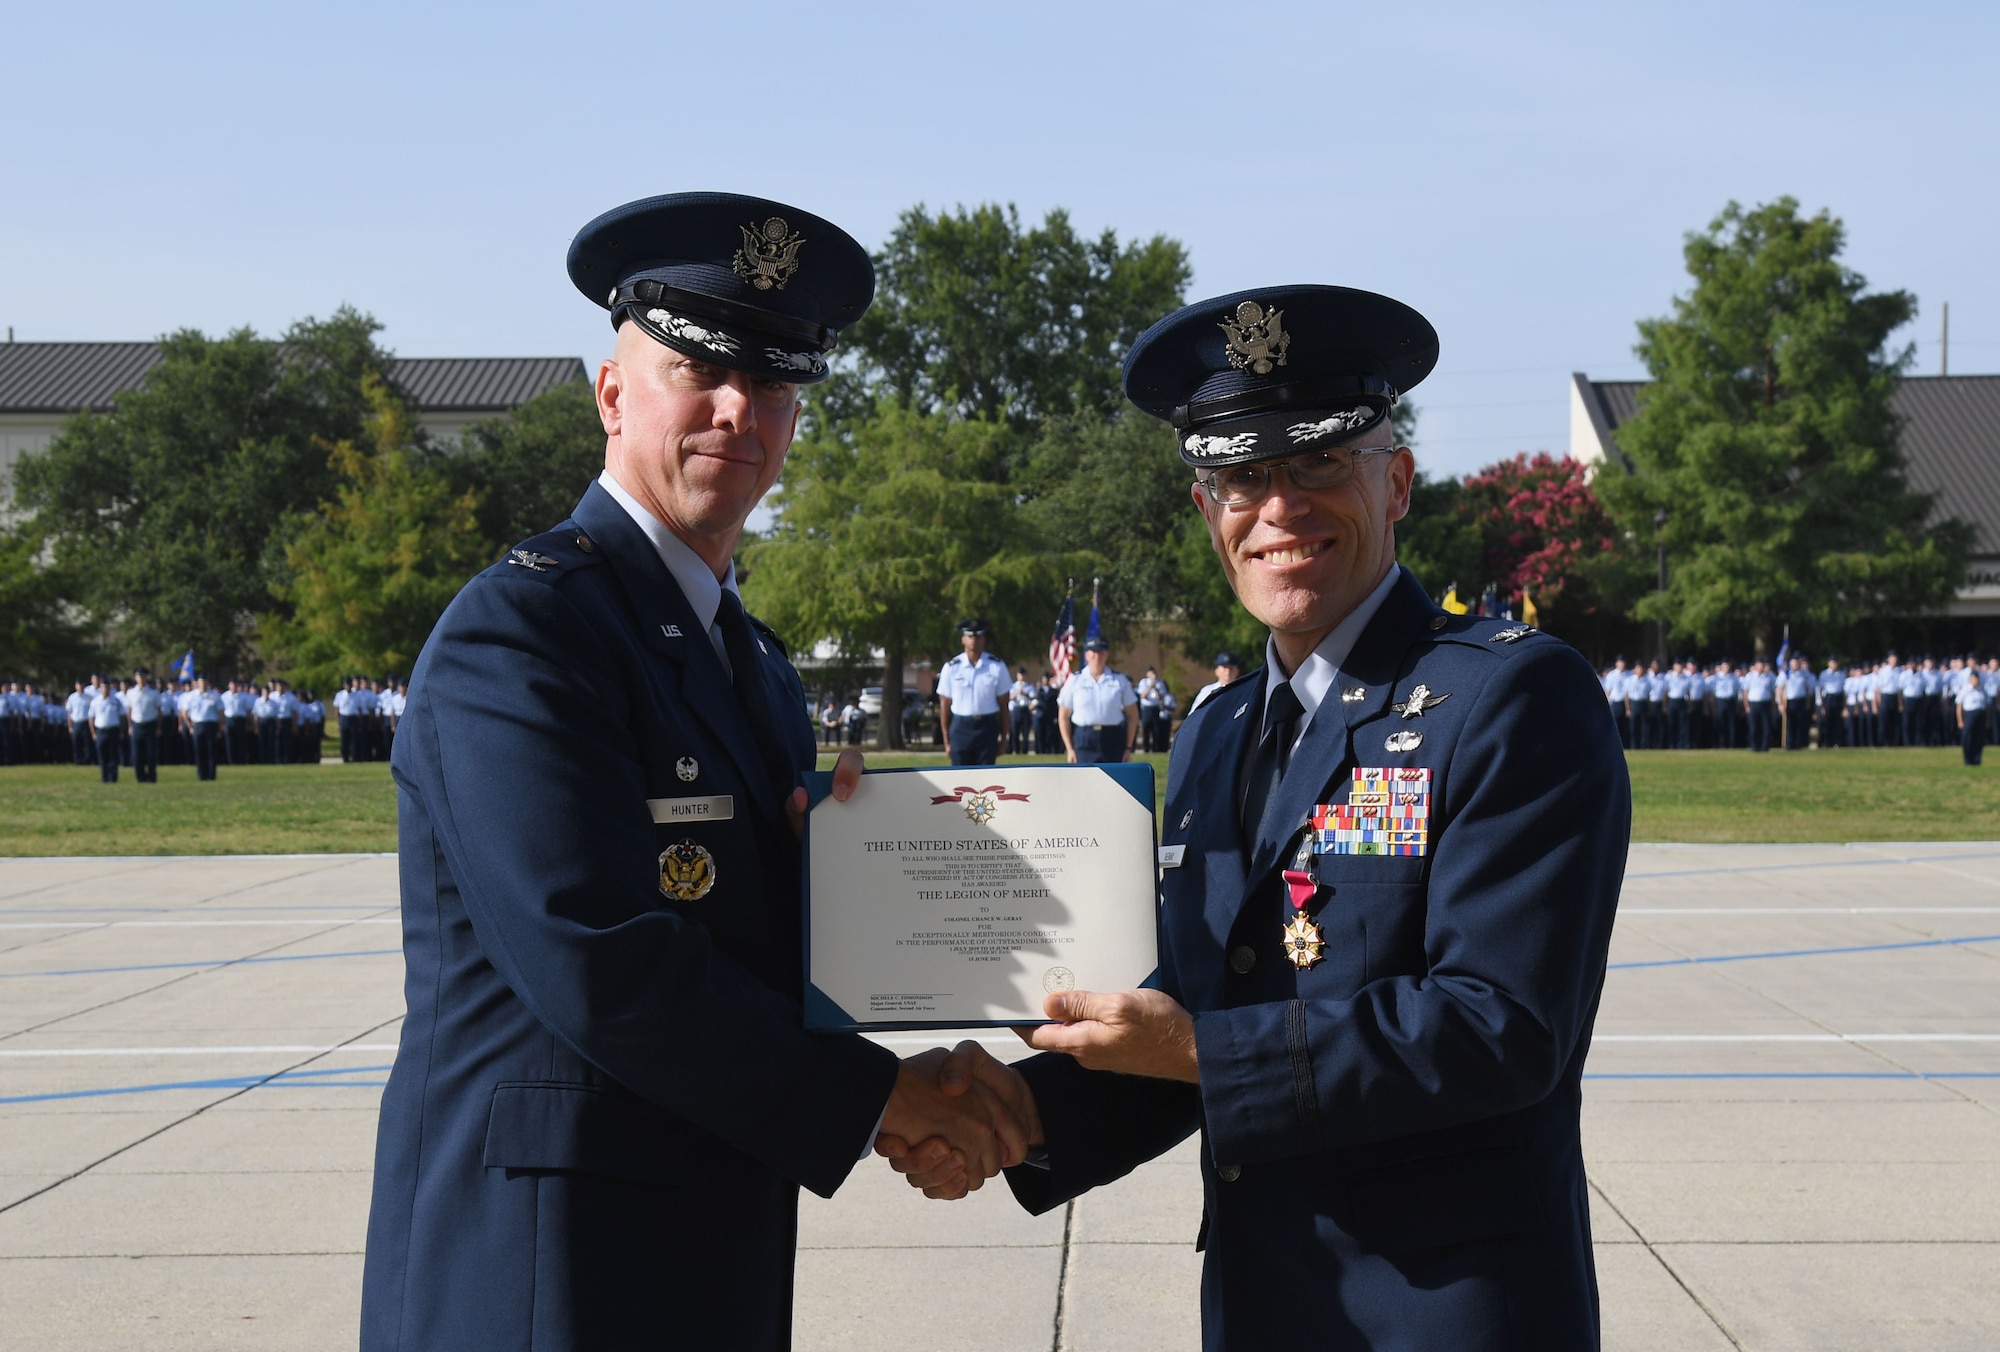 U.S. Air Force Col. William Hunter, 81st Training Wing commander, presents the Legion of Merit award to Col. Chance Geray, outgoing 81st Training Group commander, during the 81st TRG Change of Command Ceremony on the Levitow Training Support Facility drill pad at Keesler Air Force Base, Mississippi, June 15, 2022. Geray passed command of the 81st TRG to Col. Laura King. (U.S. Air Force photo by Kemberly Groue)